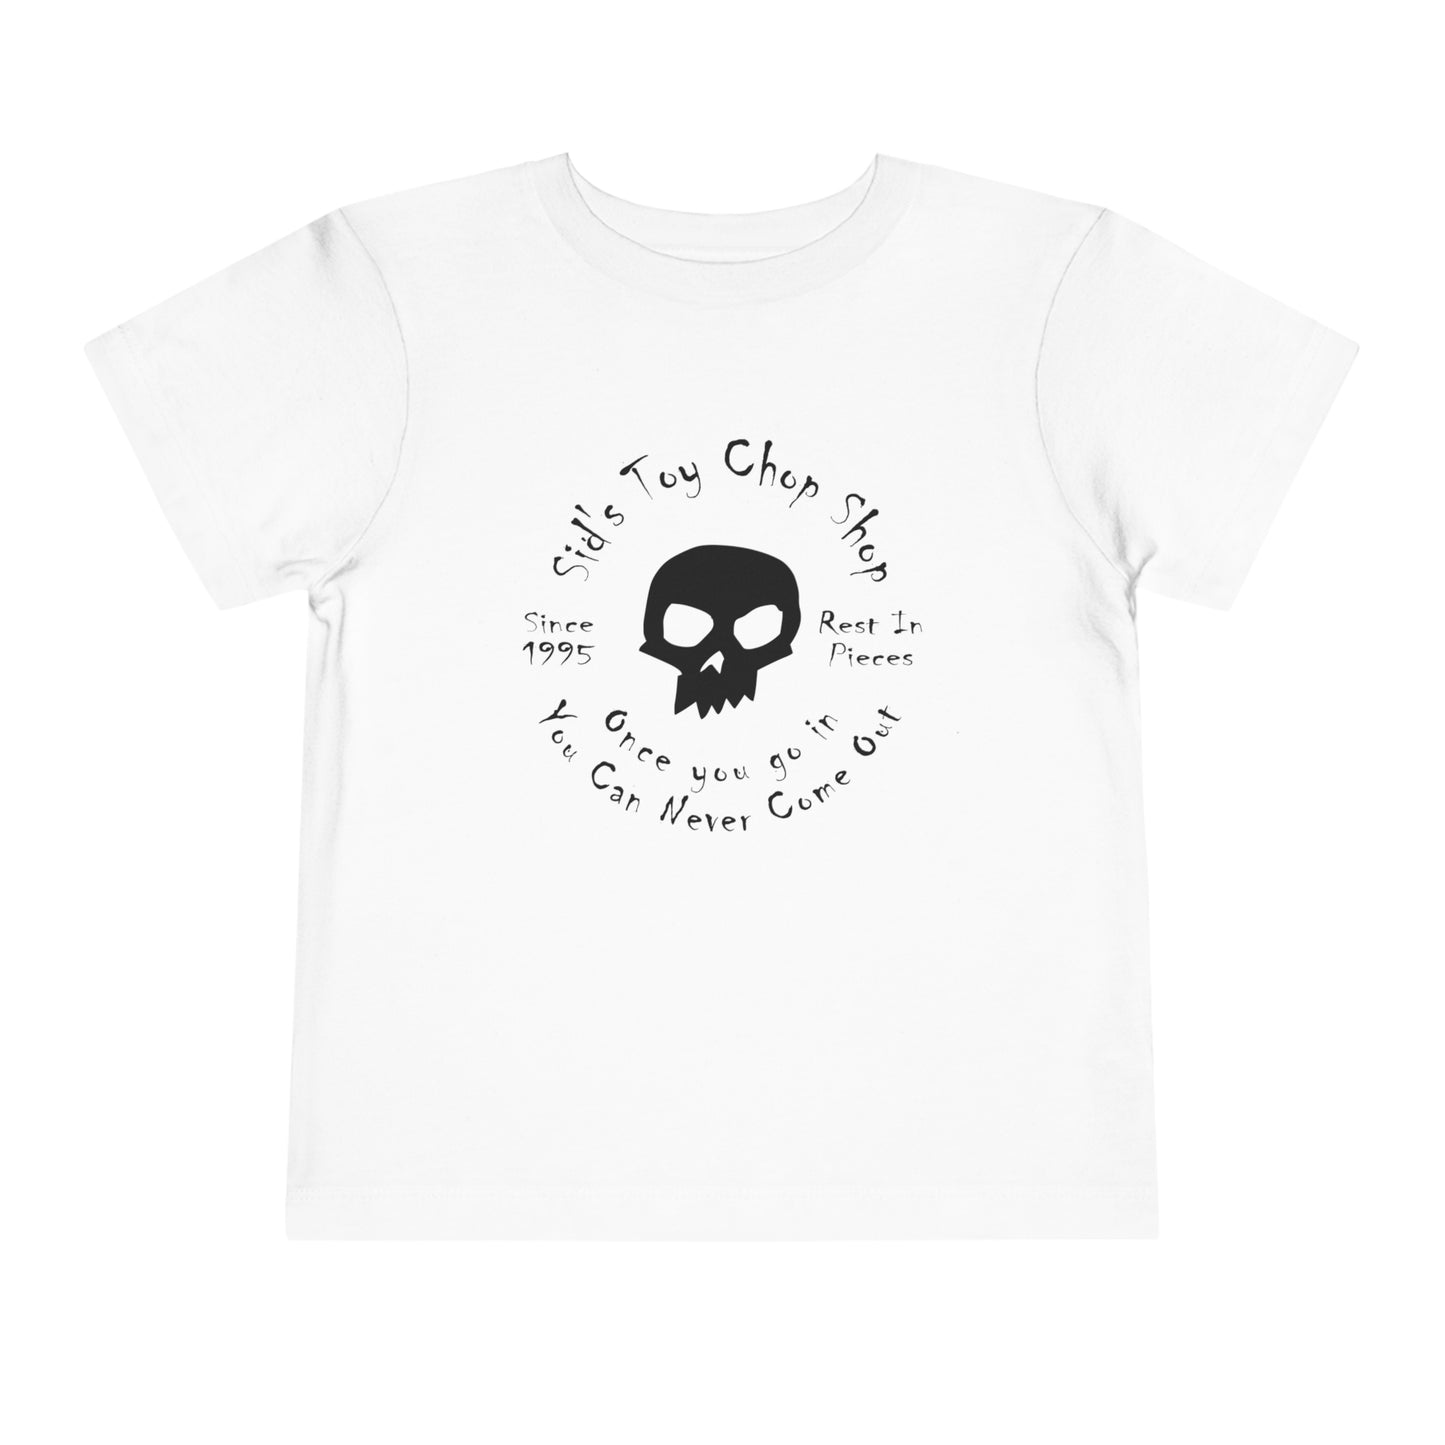 Sid's Toy Chop Shop Bella Canvas Toddler Short Sleeve Tee